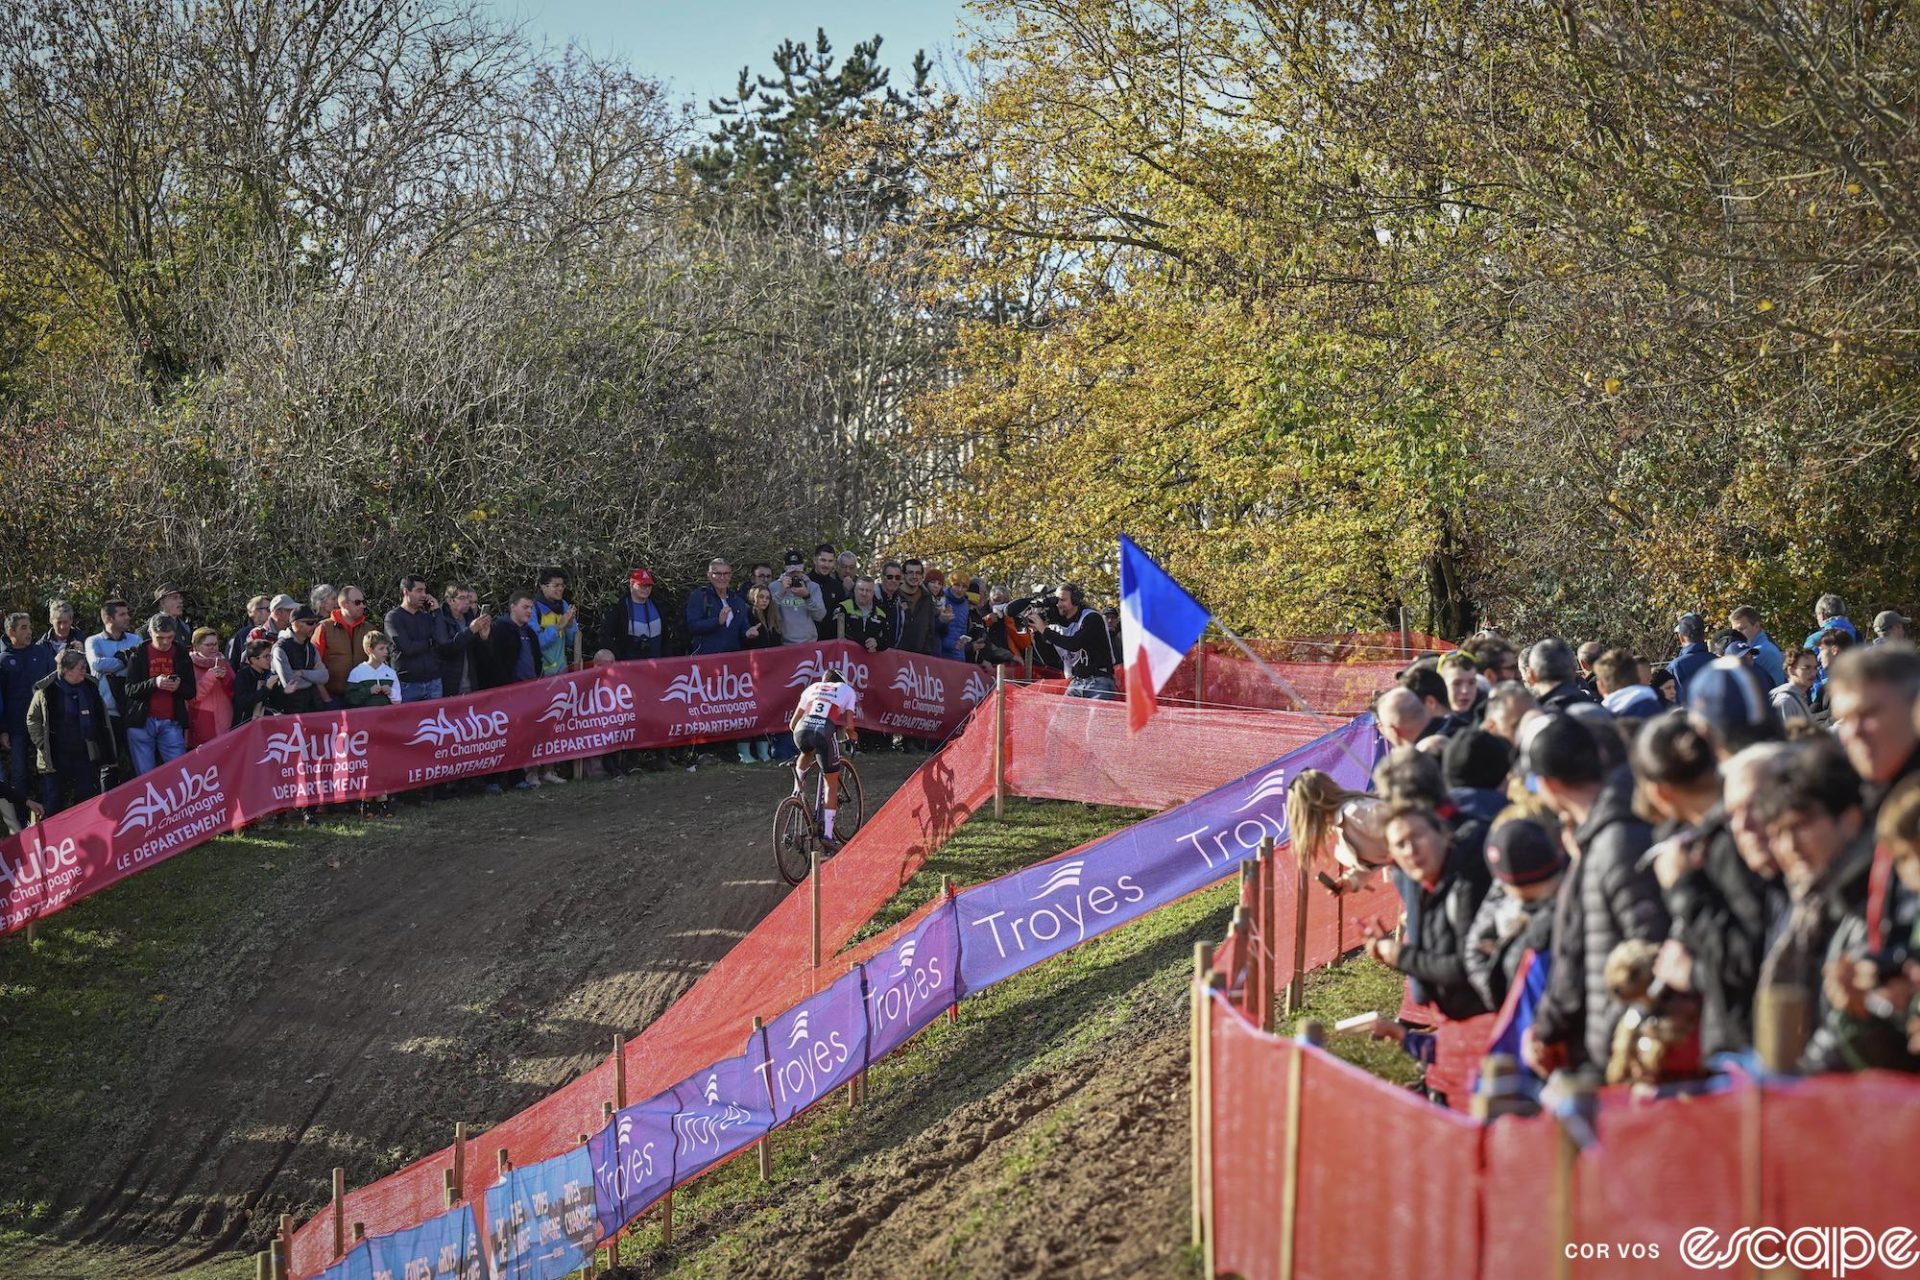 Ceylin del Carmen Alvarado rides up a small incline at Troyes. She's shown in the distance, amid large crowds in warm light, and no other racers are visible.